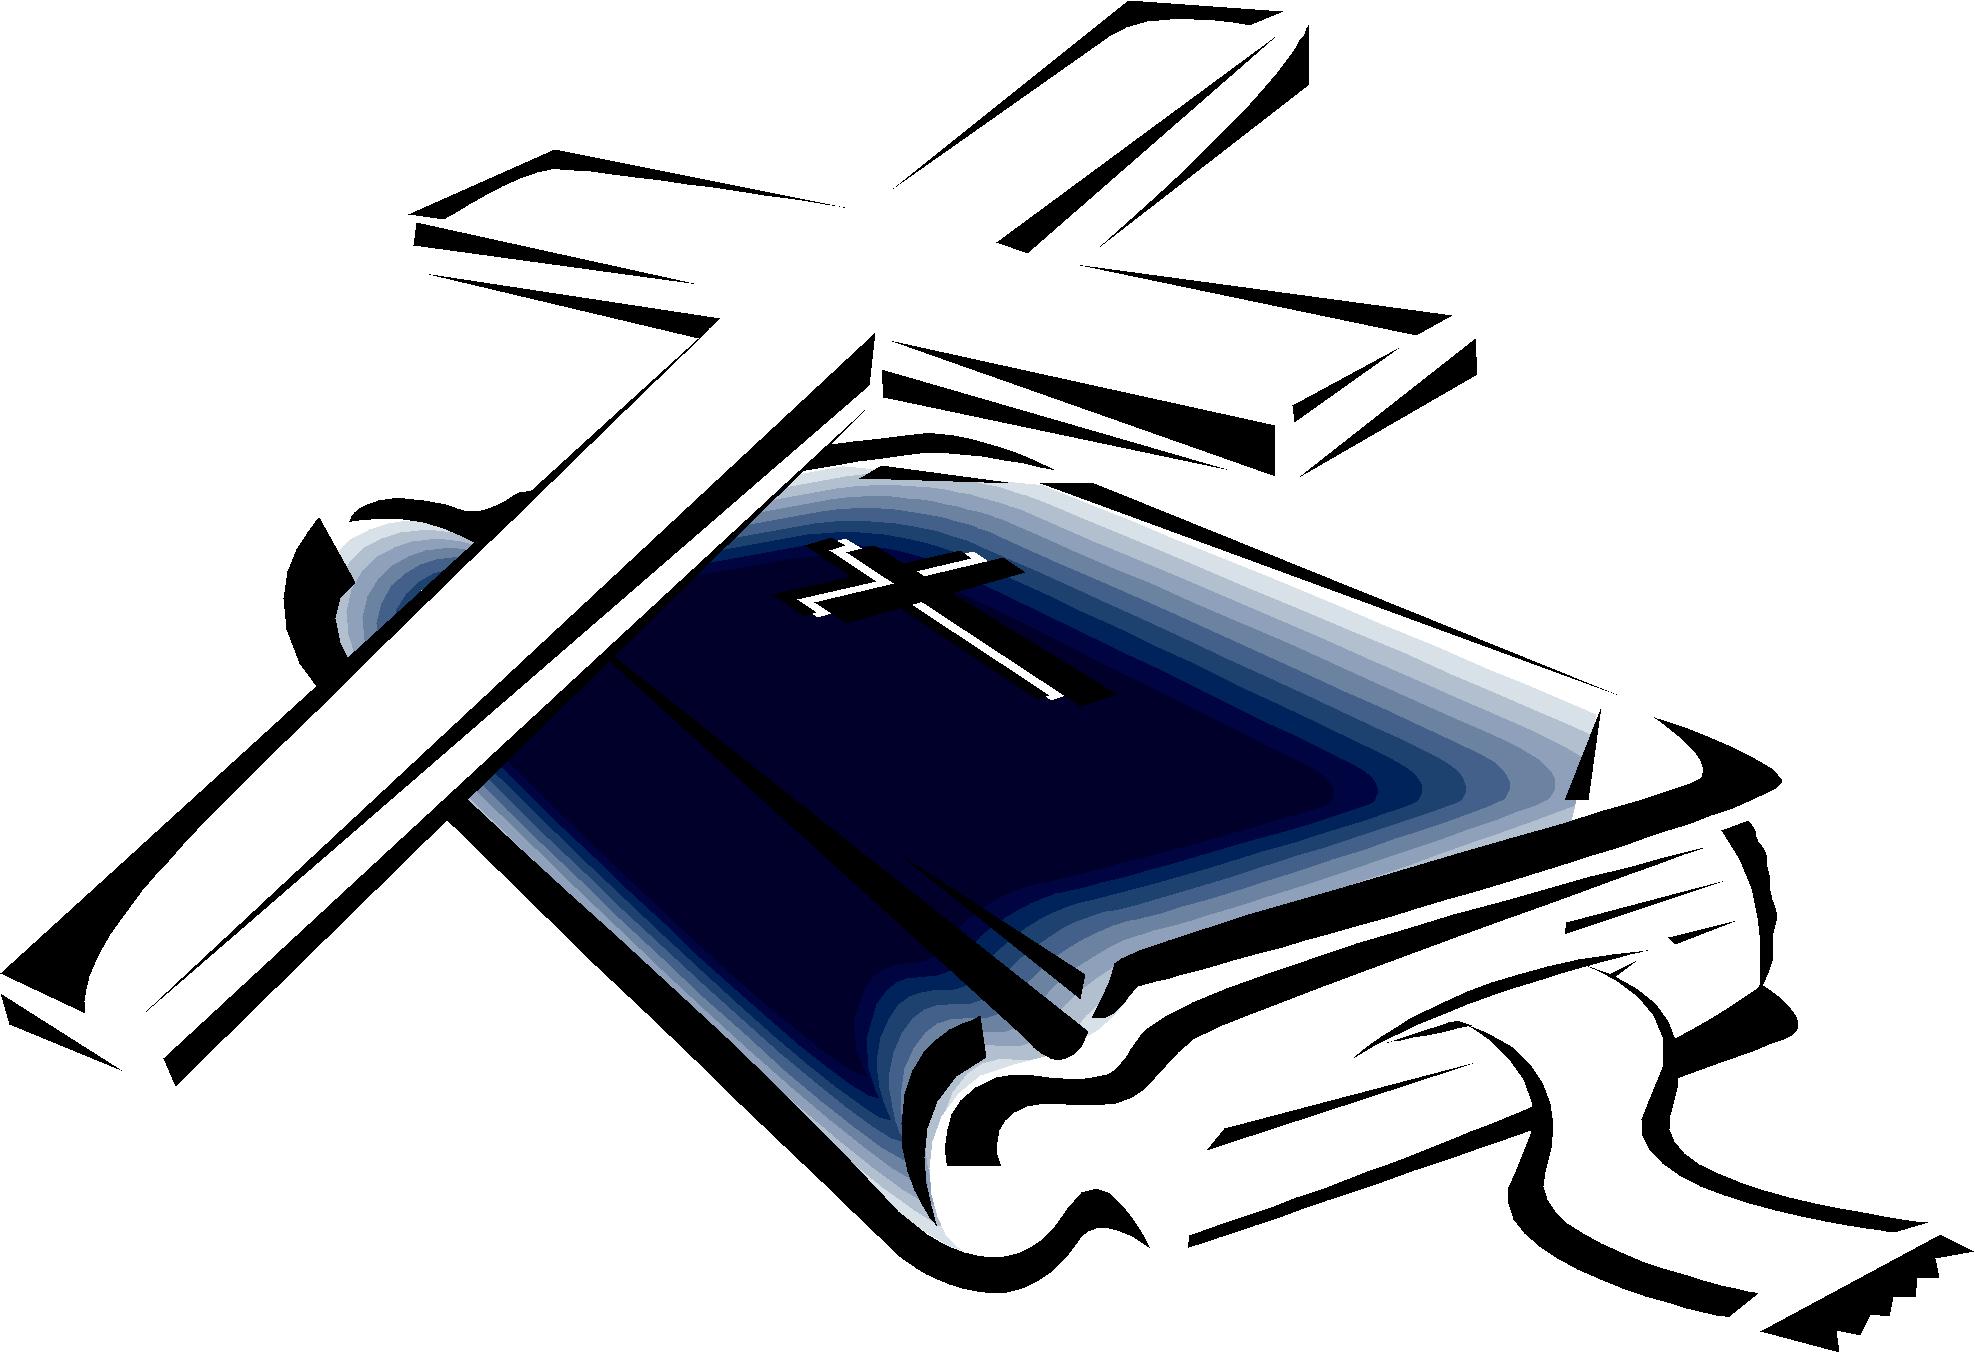 Cross And Bible cliparts